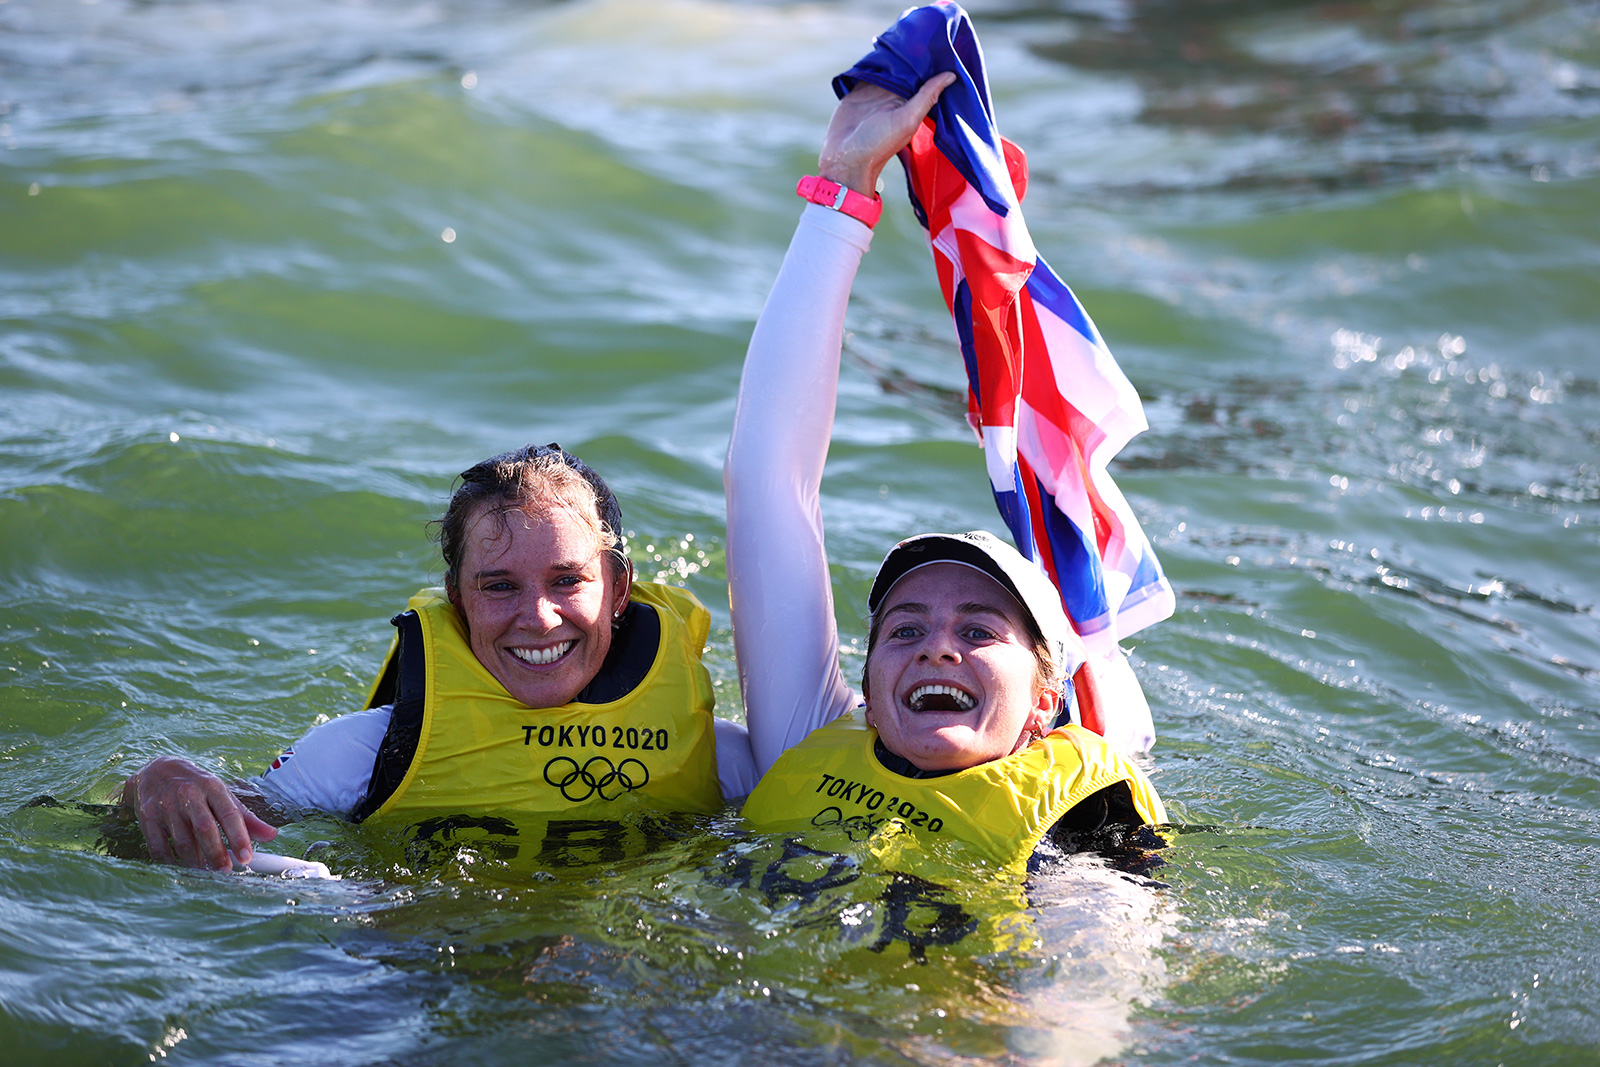 Hannah Mills, left, and Eilidh McIntyre of Team Great Britain celebrate in the water following the women’s 470 class sailing event on August 4.